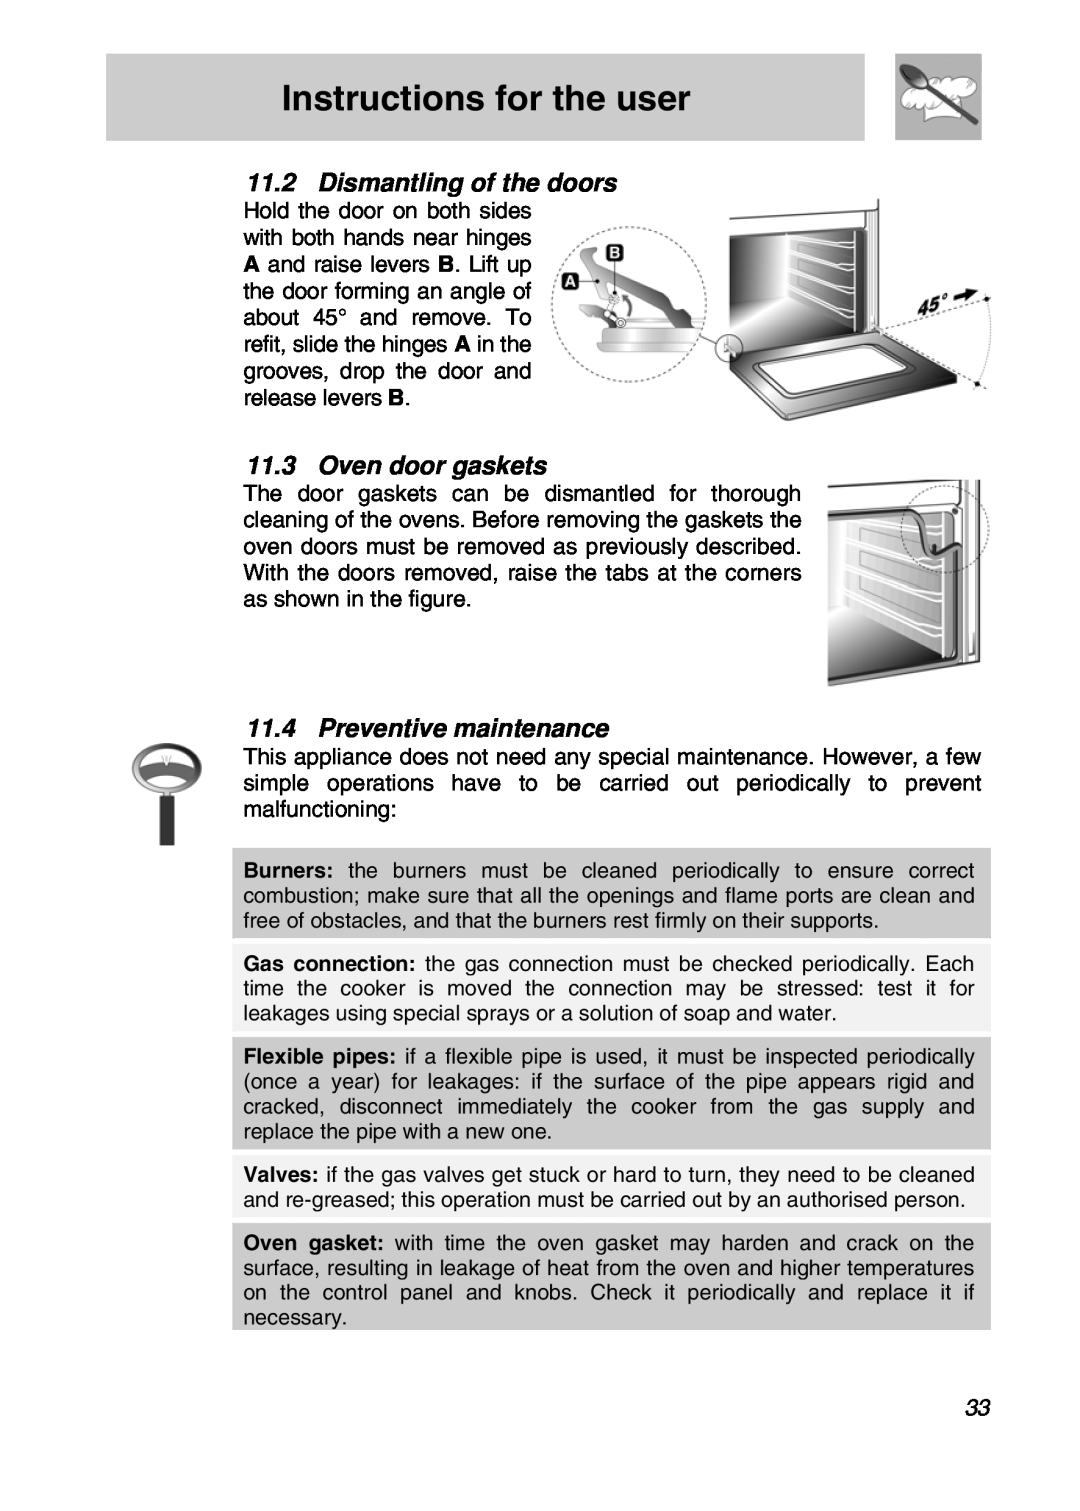 Smeg CSA19ID-6 manual Dismantling of the doors, Oven door gaskets, Preventive maintenance, Instructions for the user 